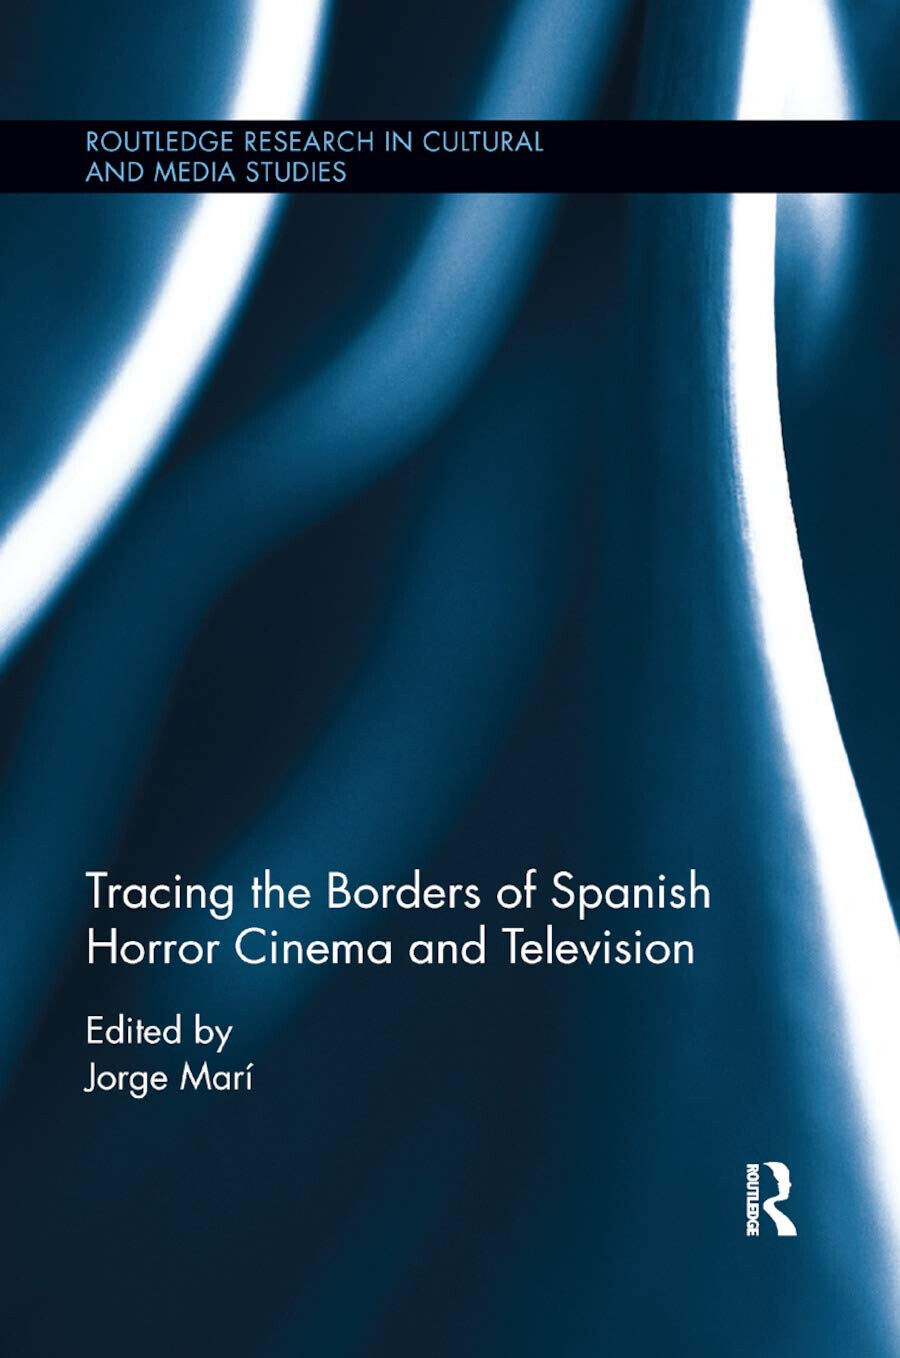 Tracing The Borders Of Spanish Horror Cinema And Television - Jorge Mar? - 2019